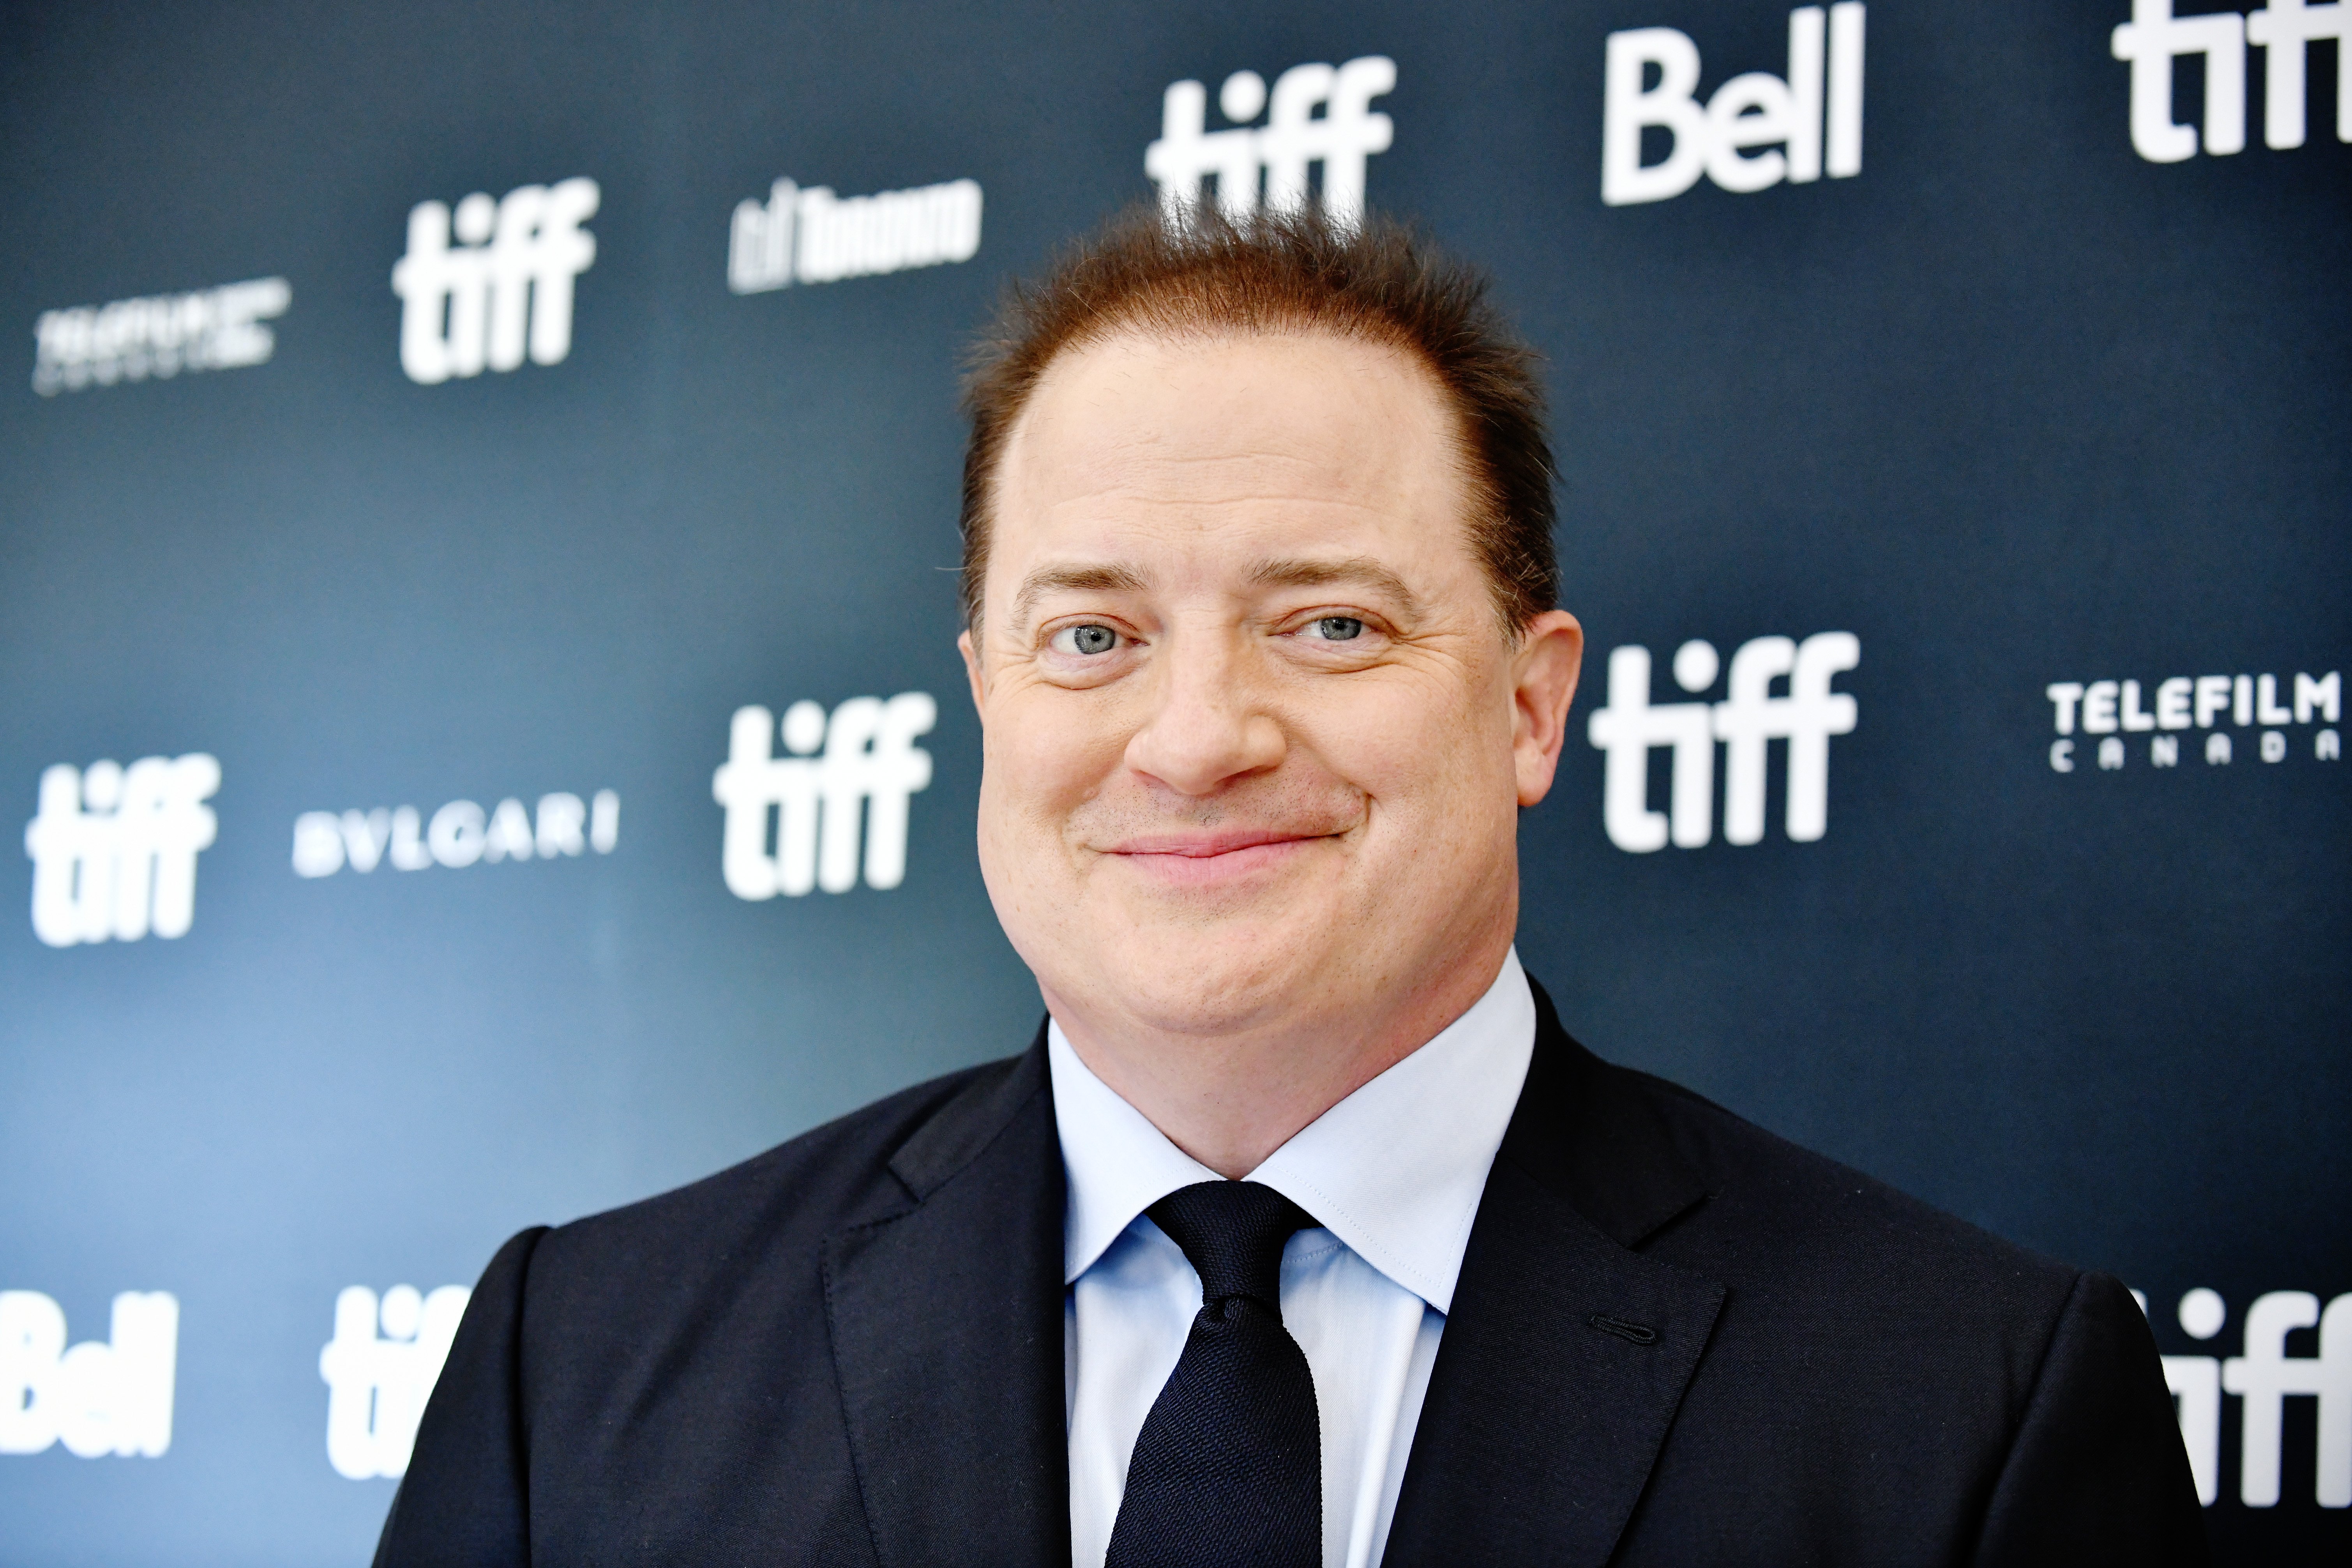 Brendan Fraser at the premiere of "The Whale" during the 2022 Toronto International Film Festival at Royal Alexandra Theatre on September 11, 2022 in Toronto, Ontario. | Source: Getty Images